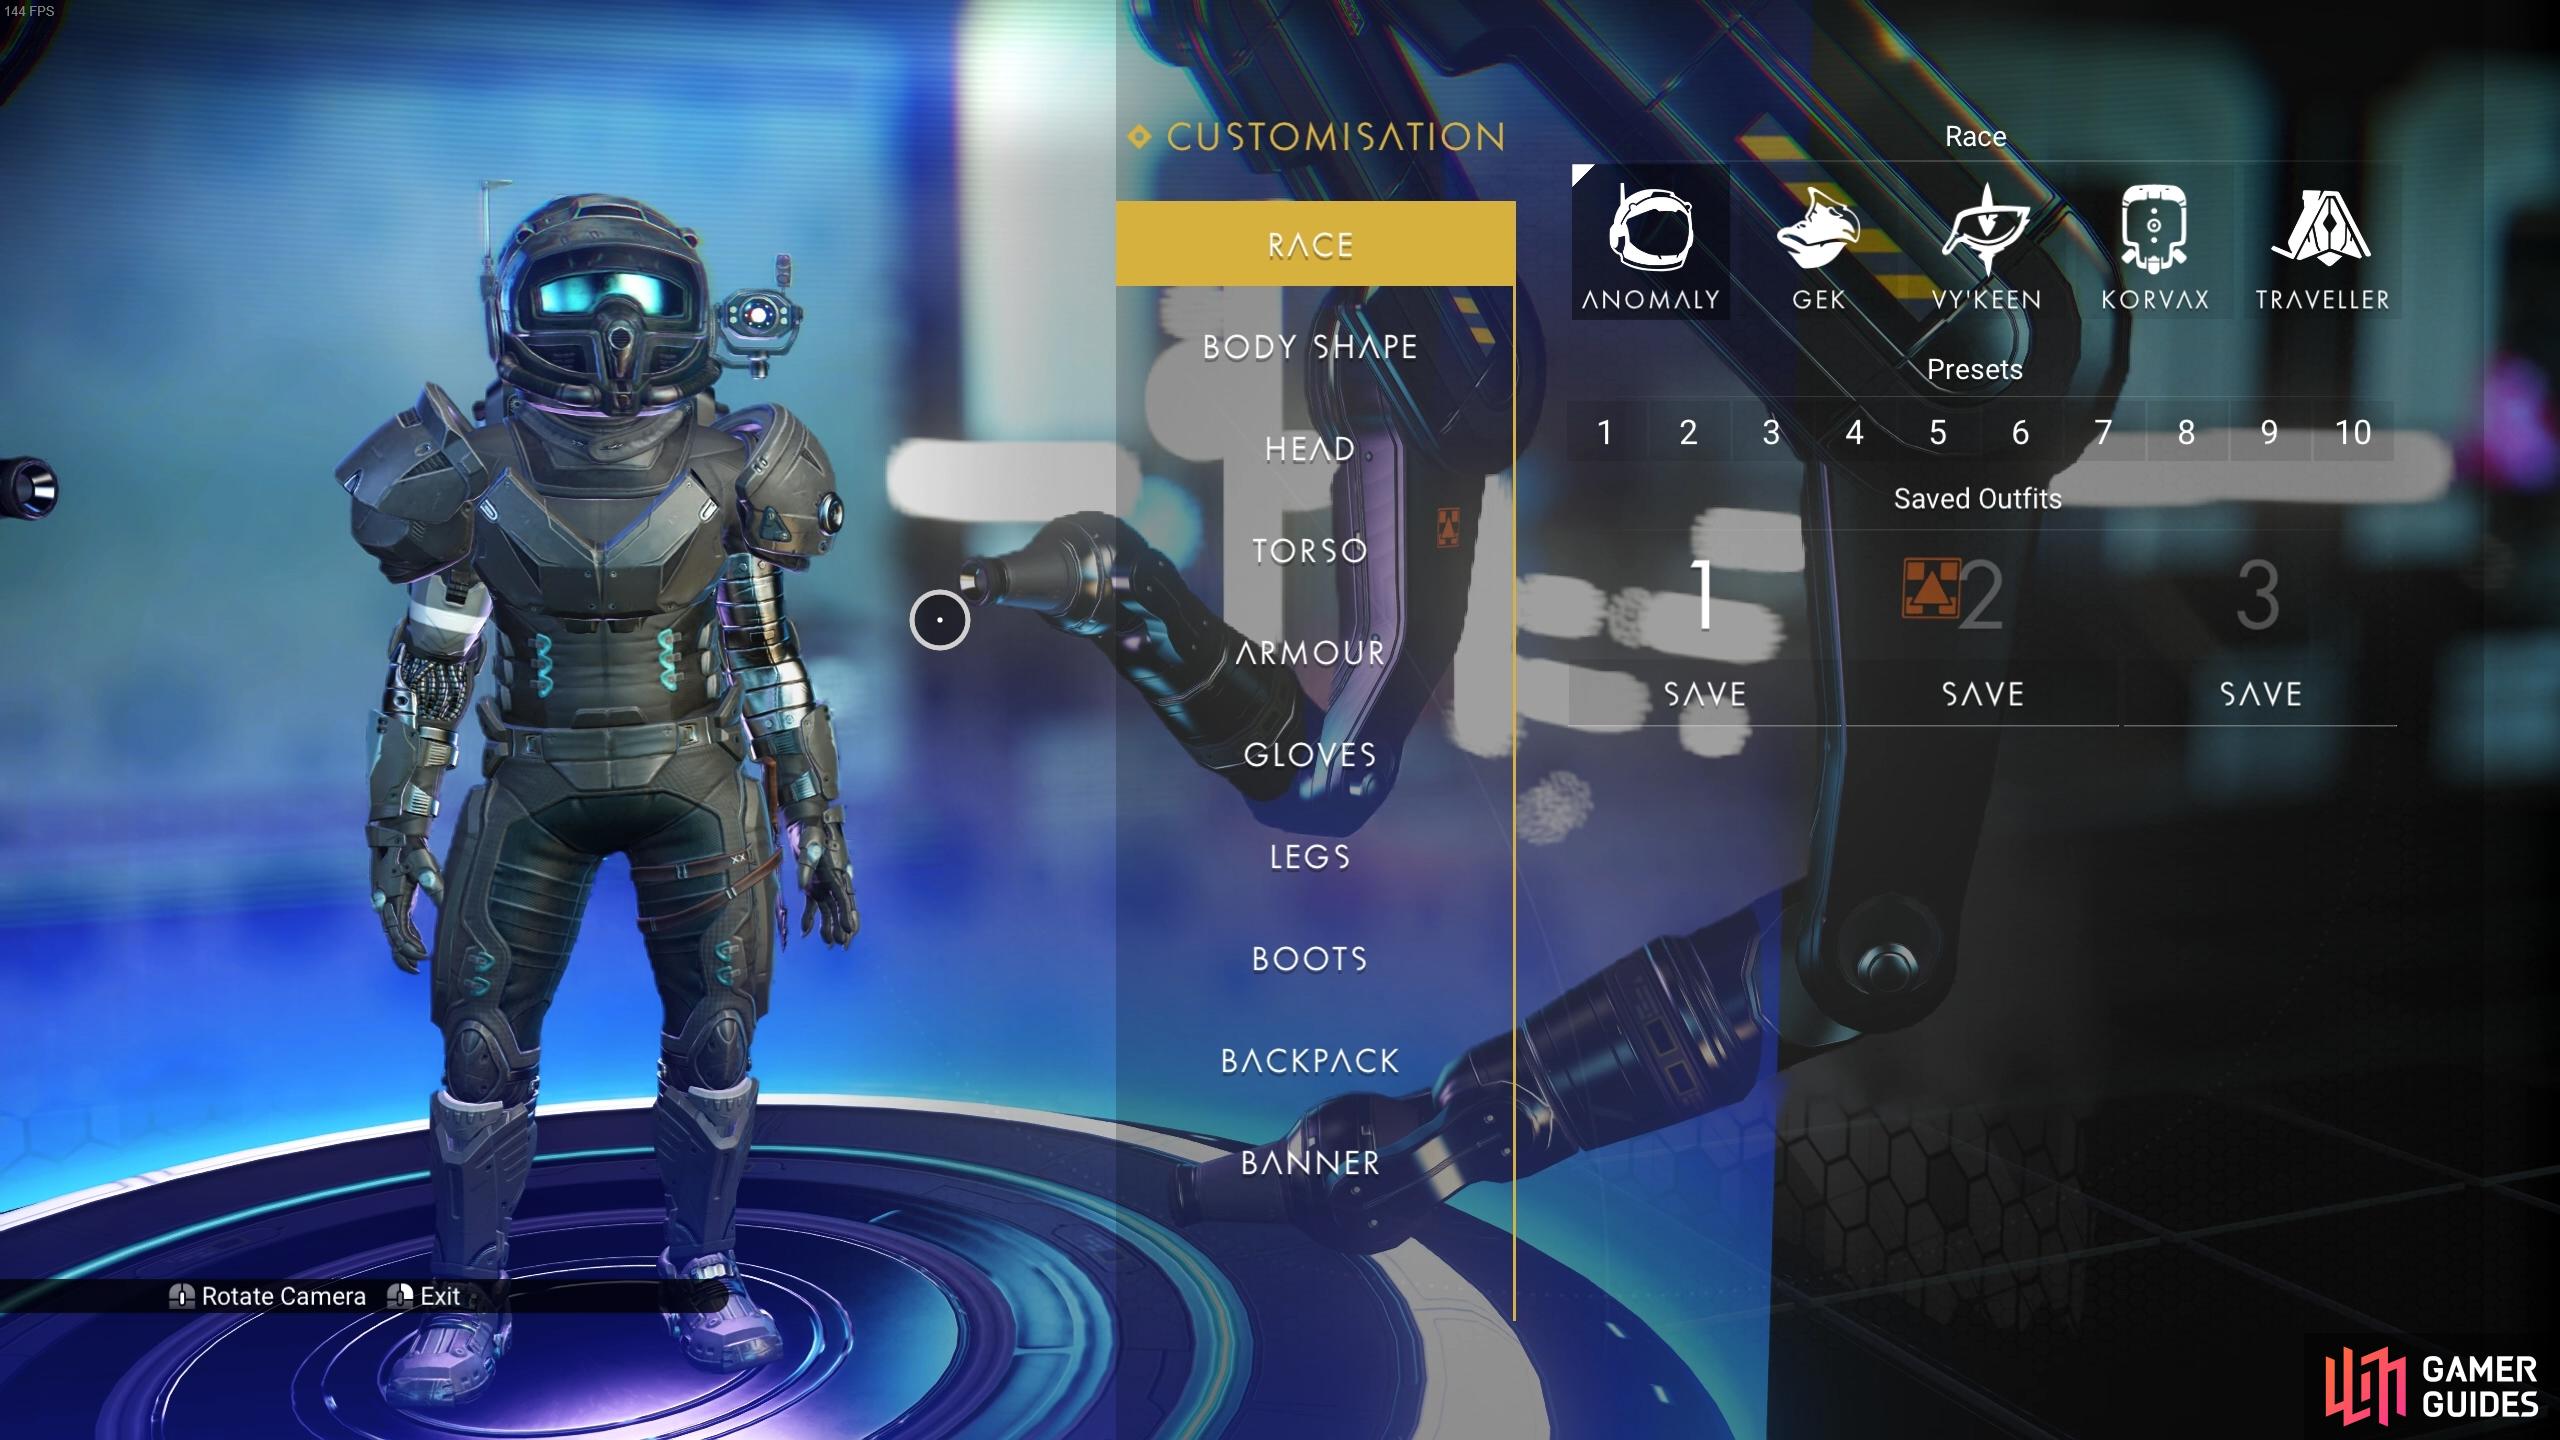 You can customize a great deal of your Exosuit using the modifier.